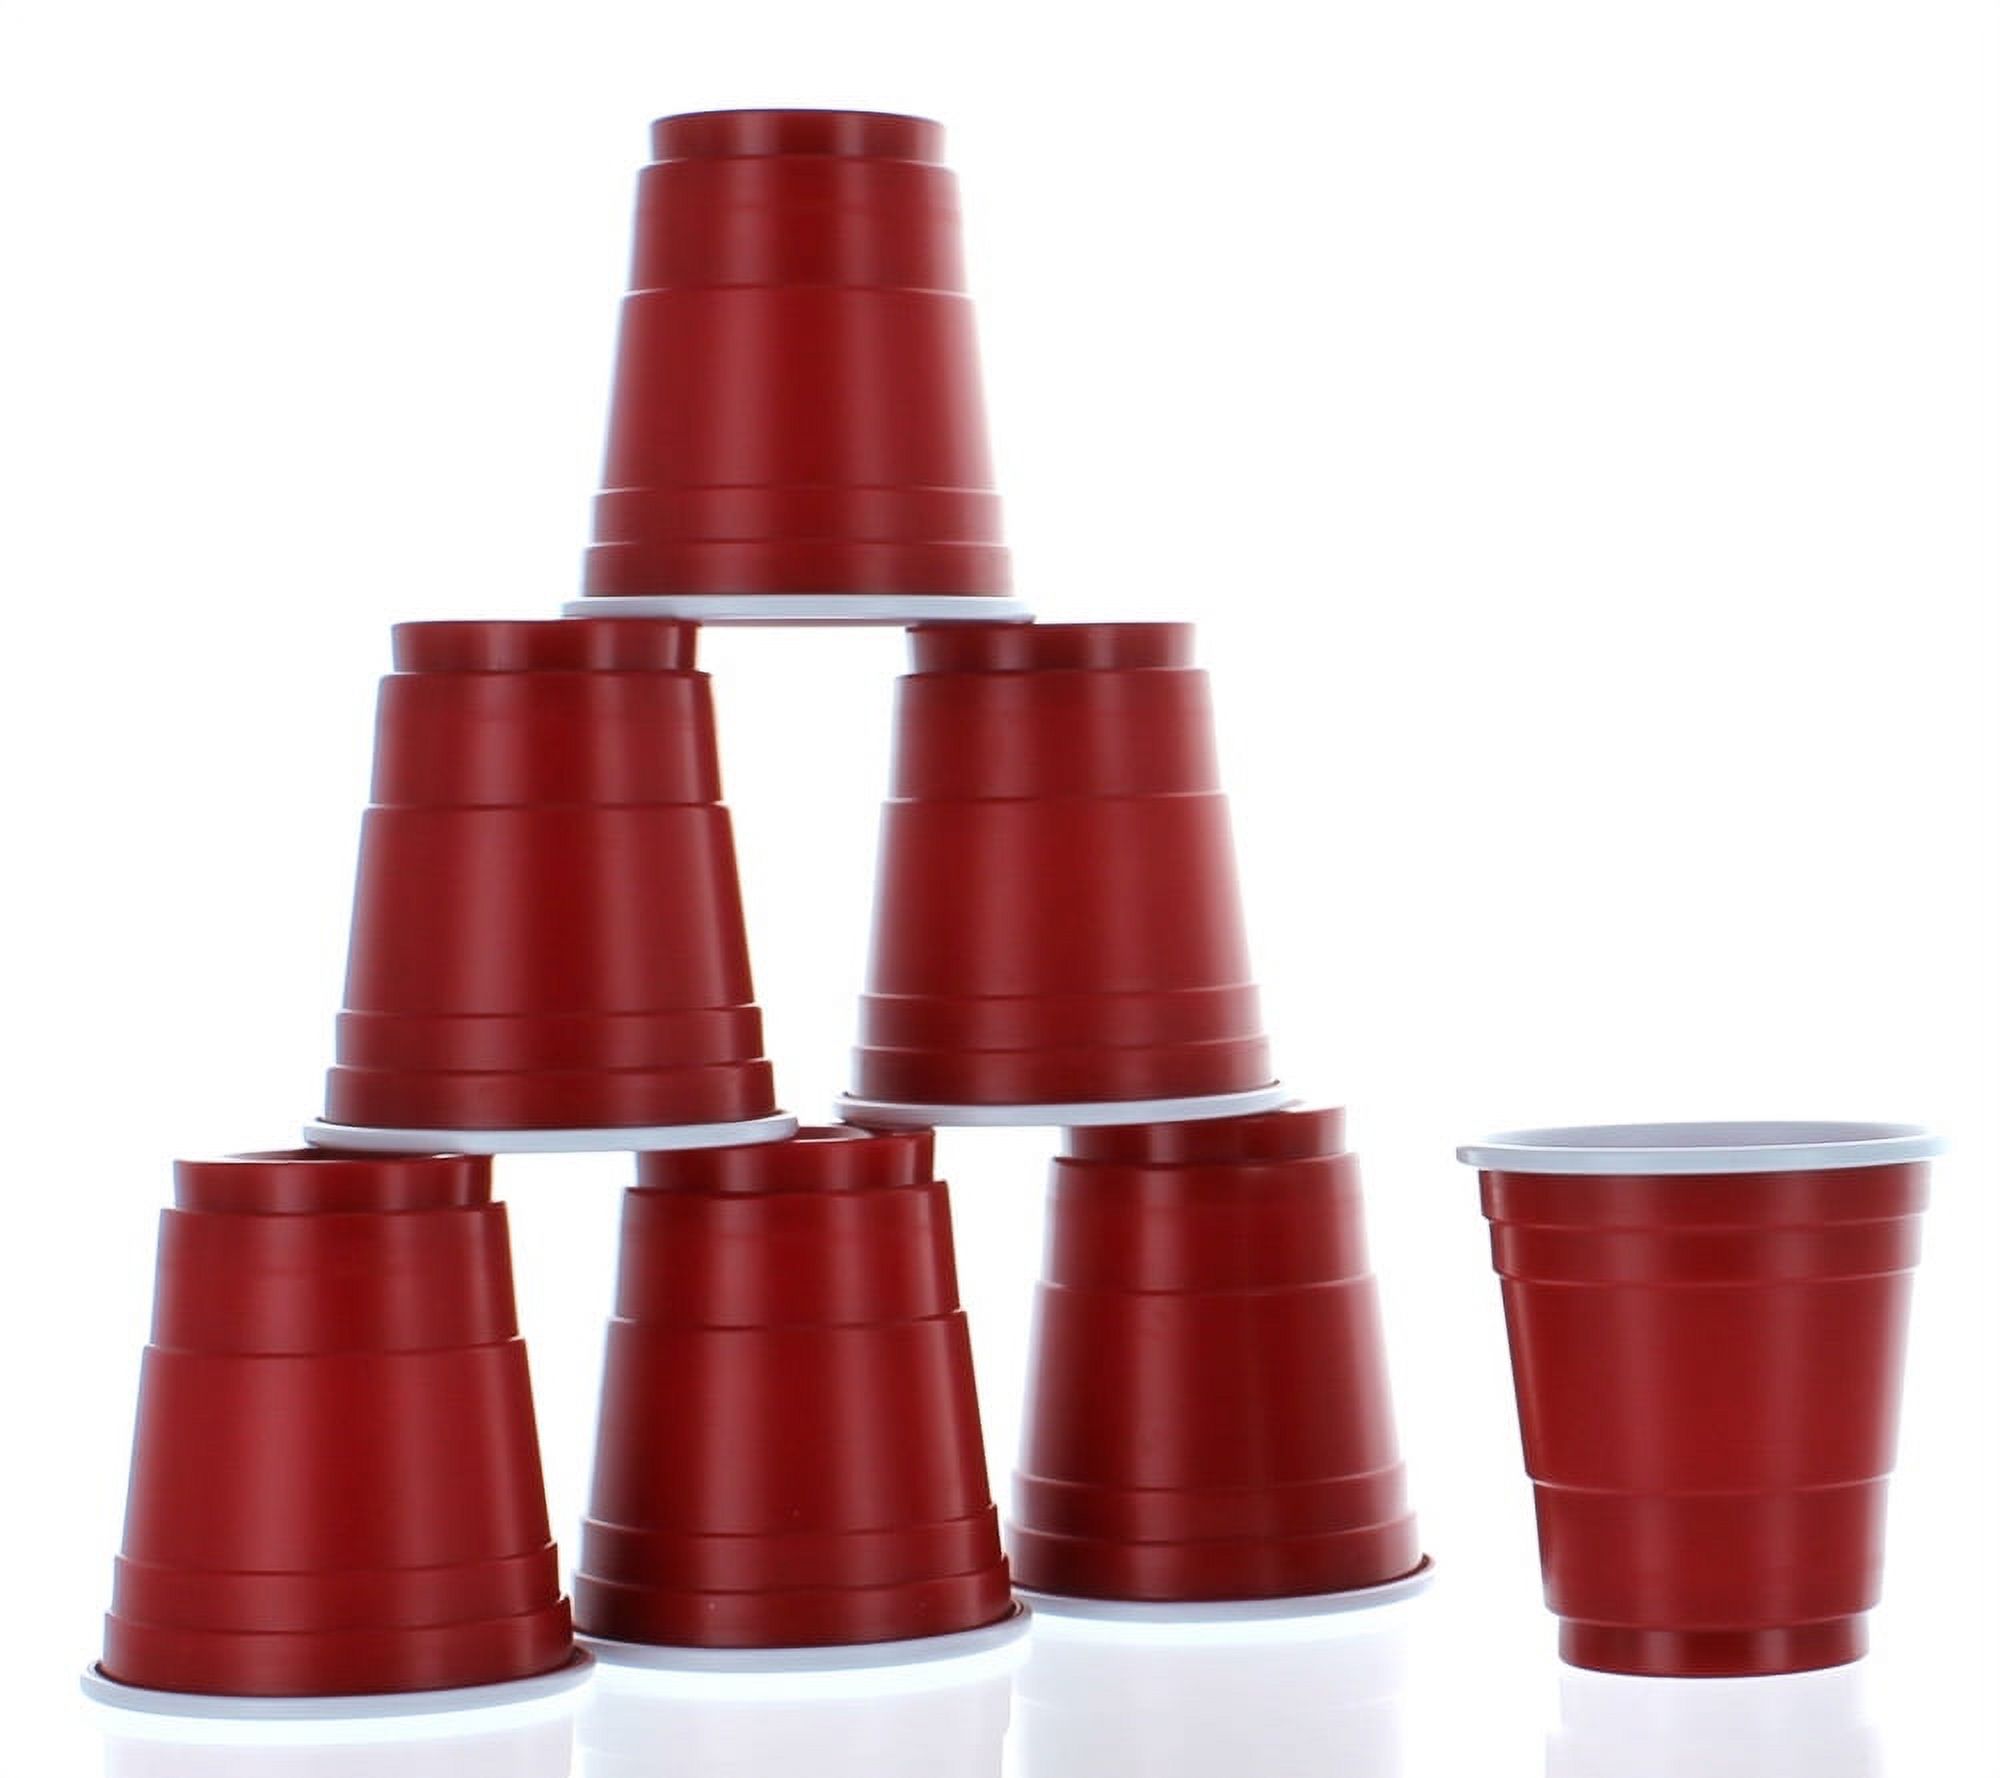 Mini Party Cup Shot Glasses, 2 Oz, Red, 20ct - image 1 of 4